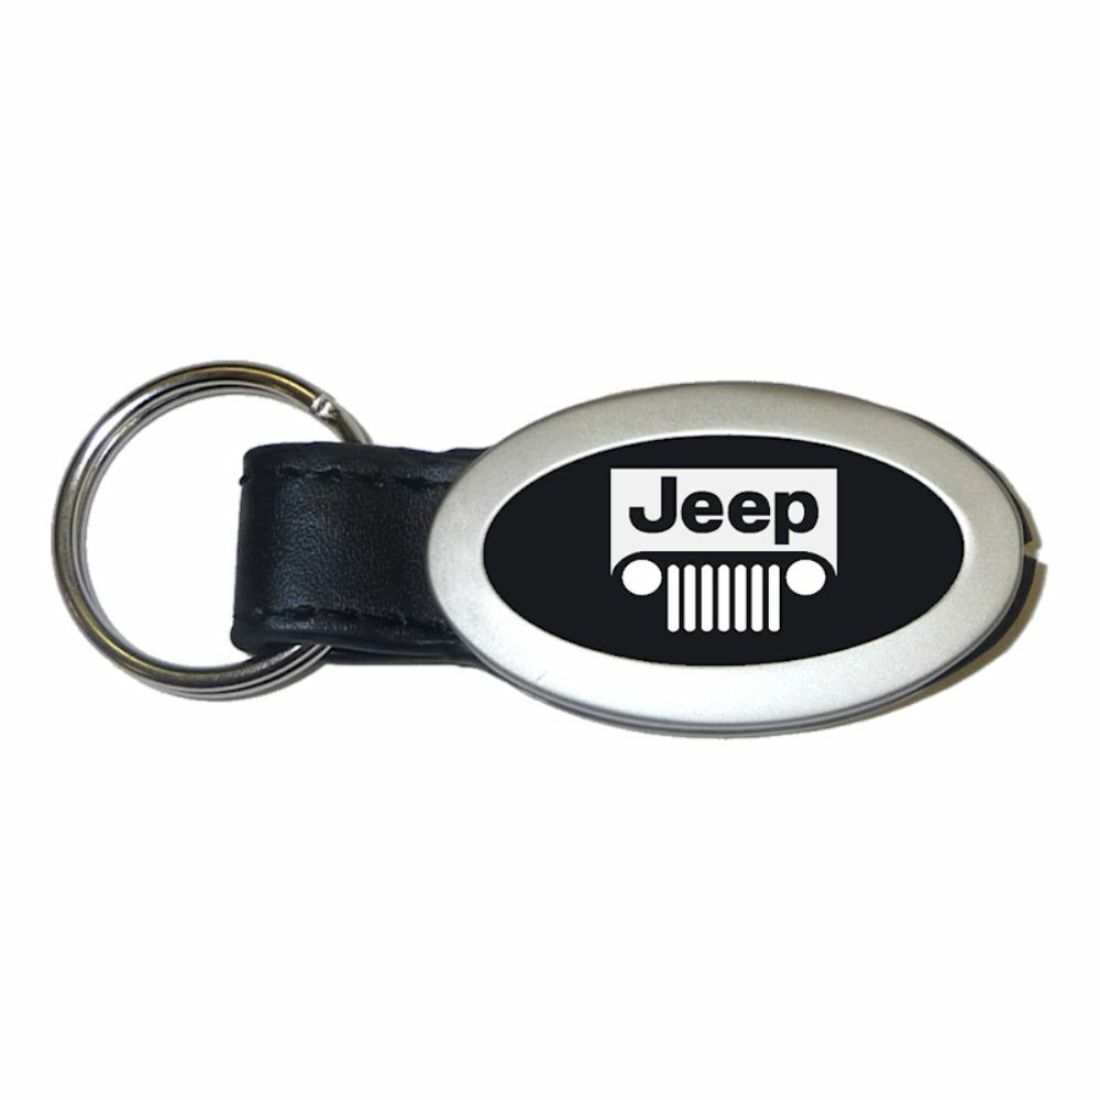 Jeep Key Ring Black and Chrome Leather Oval Keychain